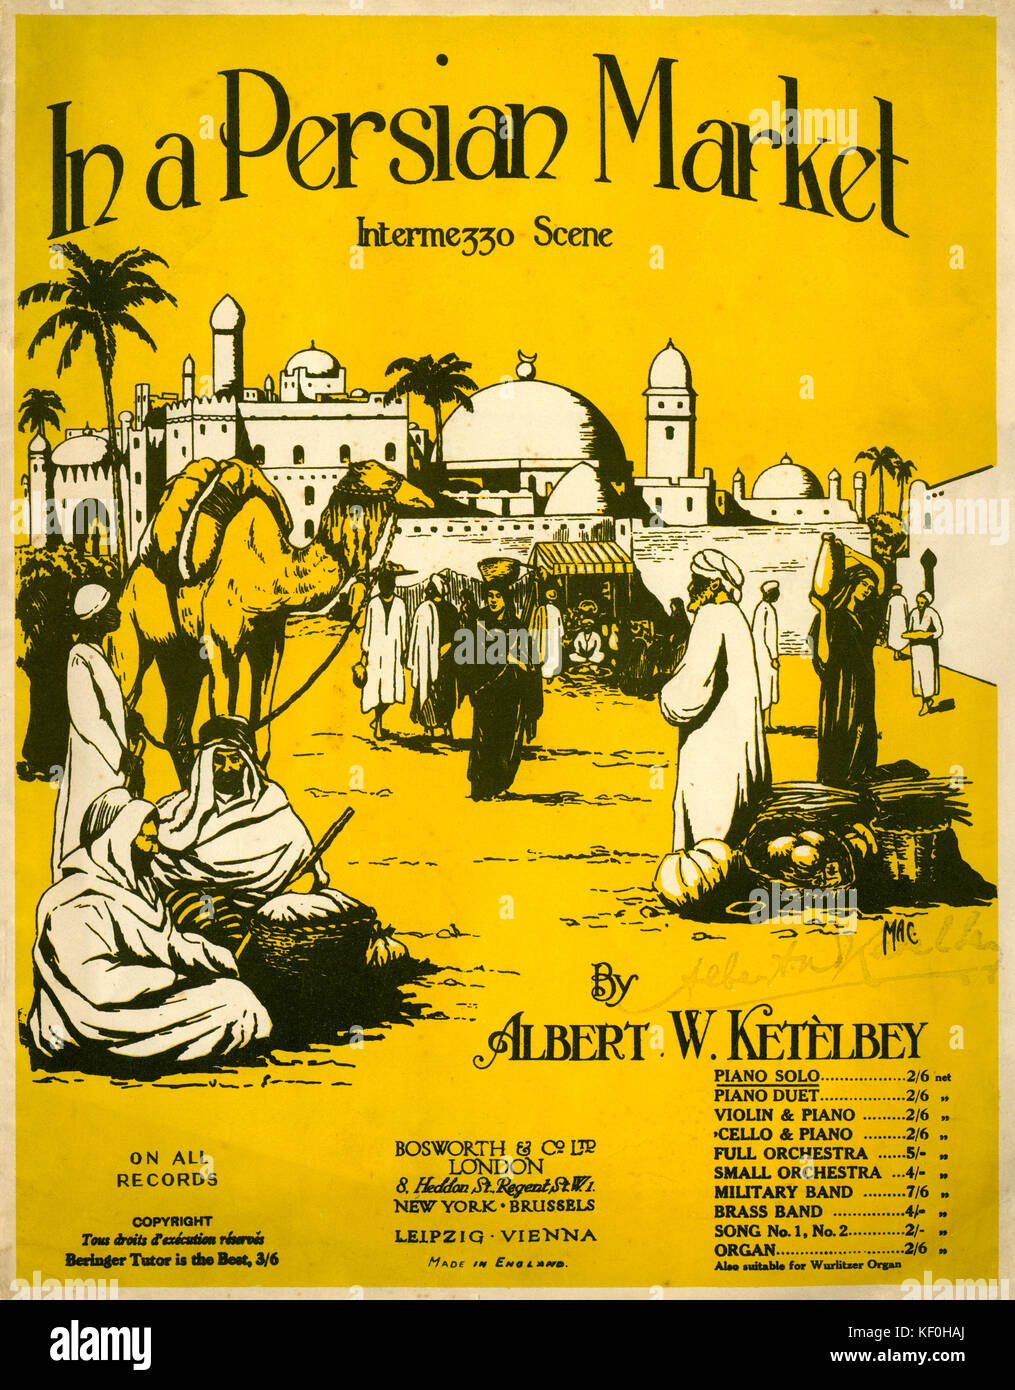 KETELBEY, Albert W - In a Persian Market Cover of score.  Published by Bosworth and Co. London, 1920. British composer and conductor, 1875-1959 Stock Photo